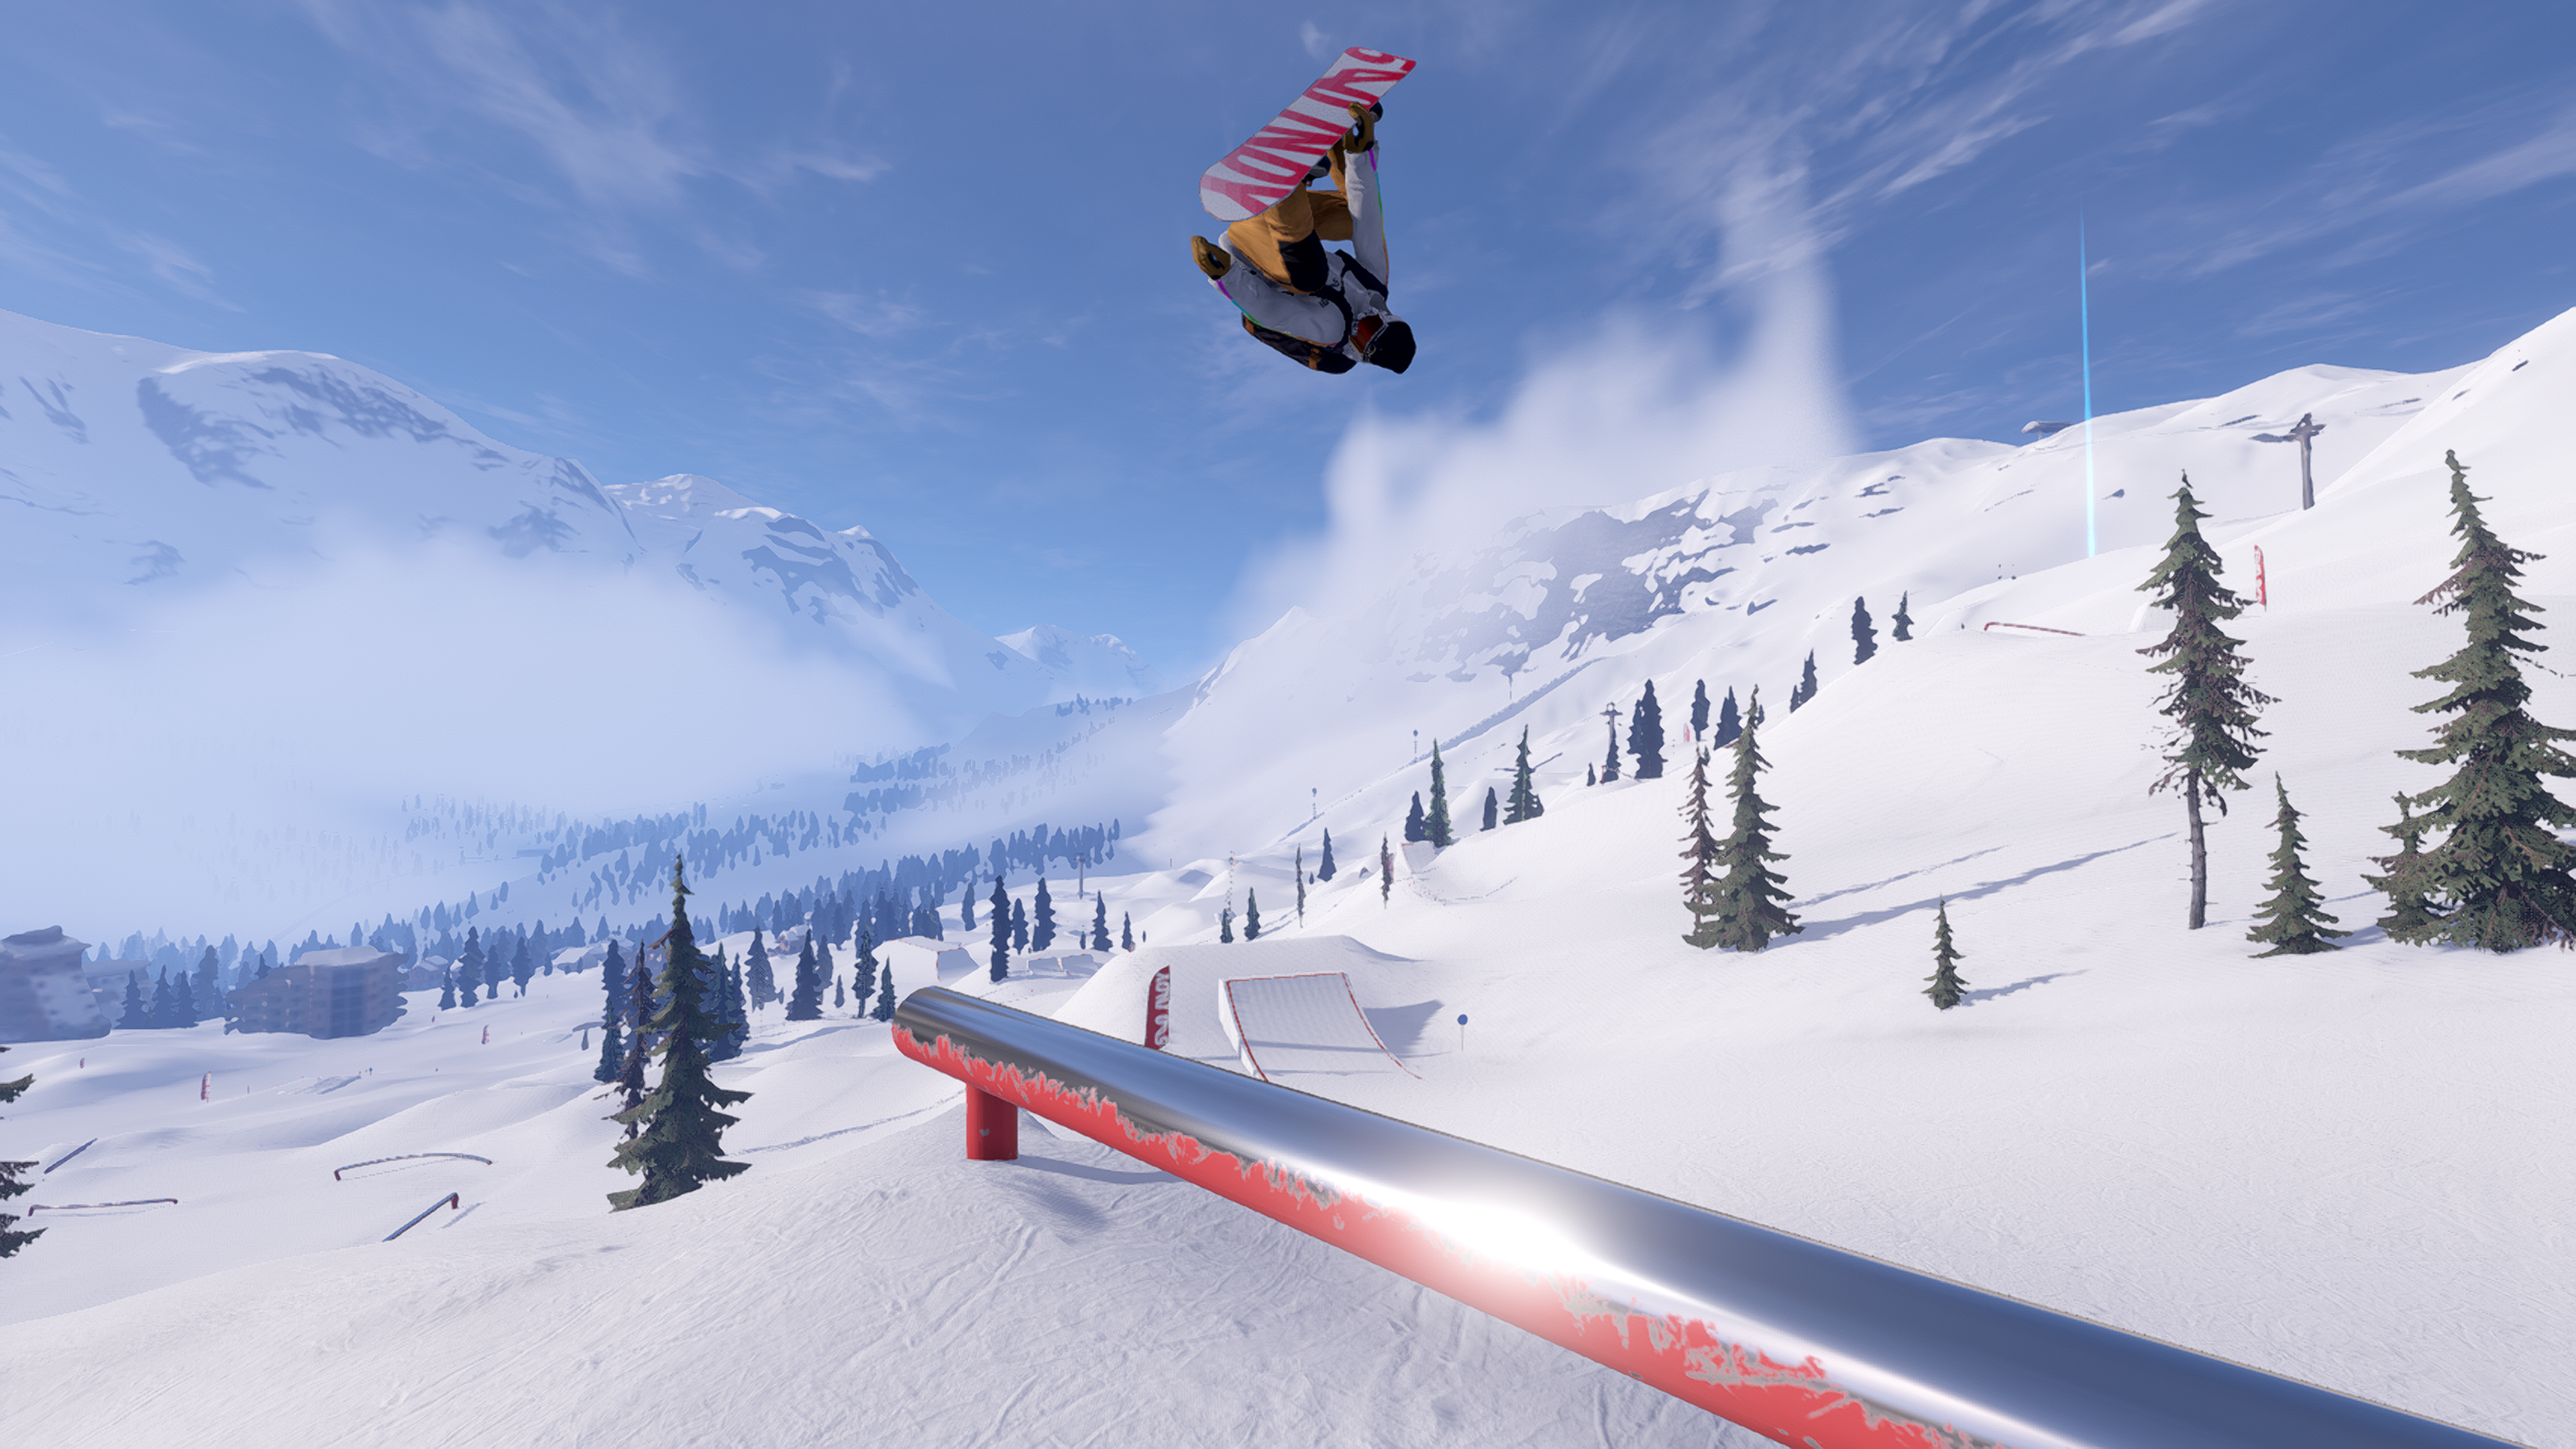 An snowboarder performing a front flip over a steel grind rail. The grind rail is read with the surface of the paint worn off down to a polished shiny steel. Dotted around the midground and background are some green trees. The background shows a valley with a large mountain to the left with som low lying cloud hovering down through the valley. The snowboarder is riding a white board with red text on the underside that reads "540 Indy"